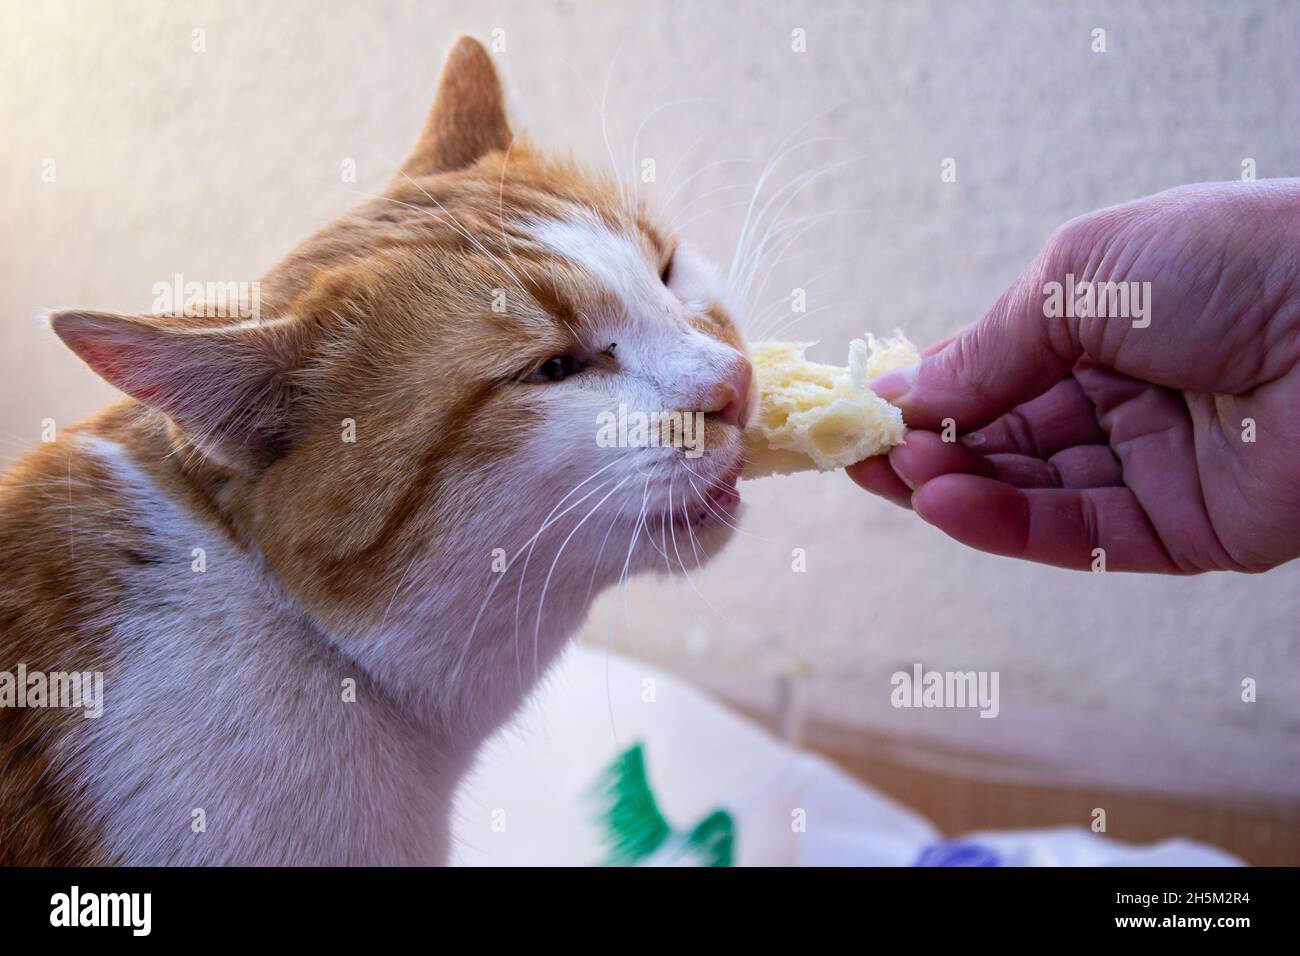 Cat eating bread, woman feeds the stray cat with bread. Stock Photo